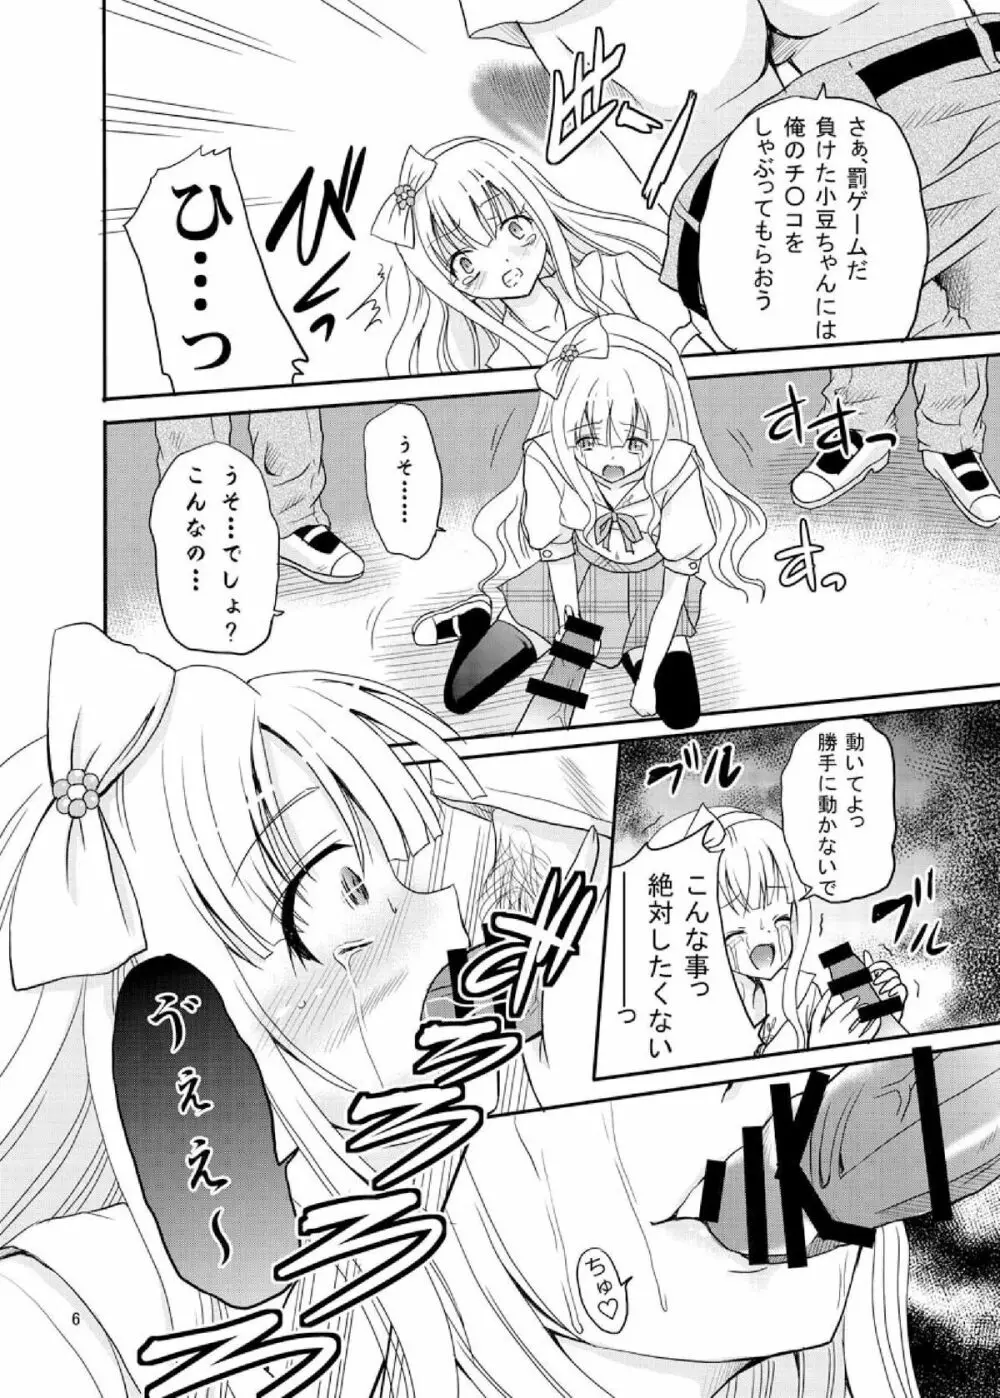 ARCANUMS 20 配信はじめました - page6